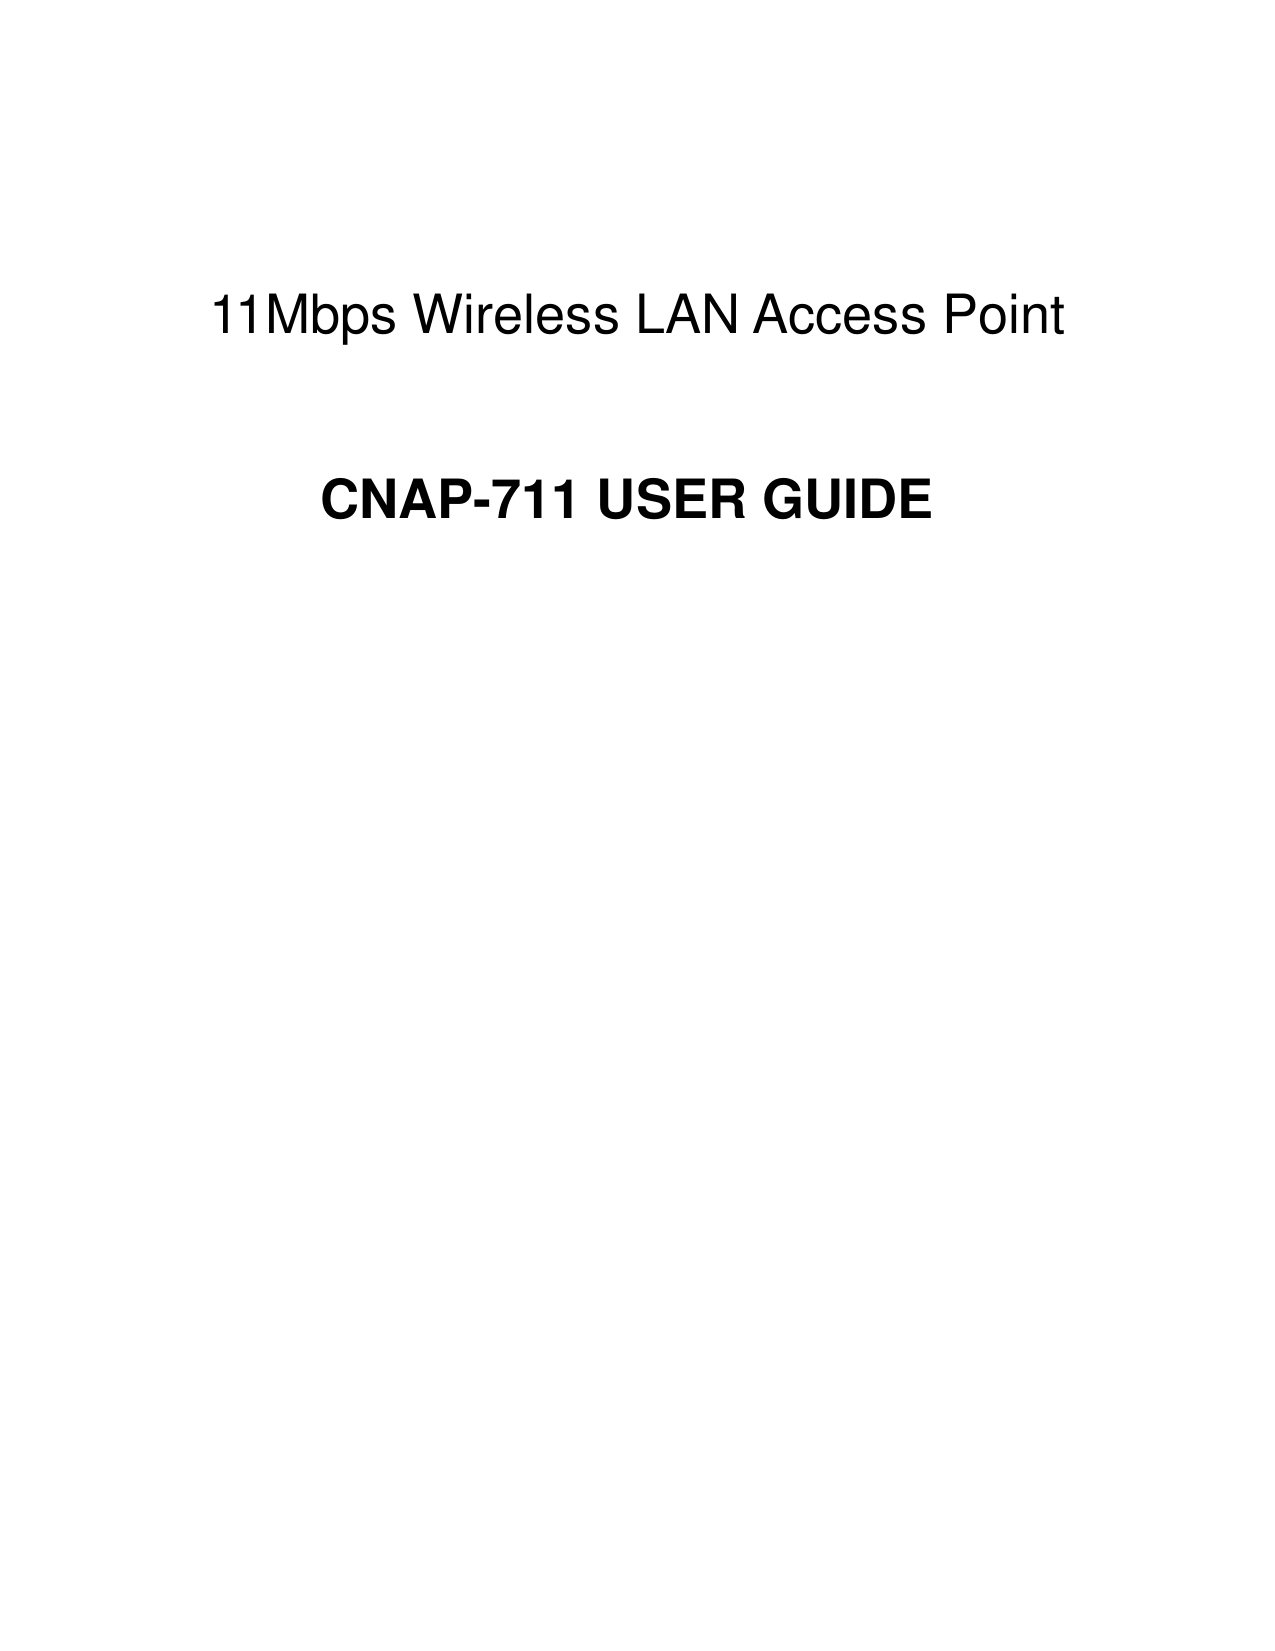     11Mbps Wireless LAN Access Point  CNAP-711 USER GUIDE    